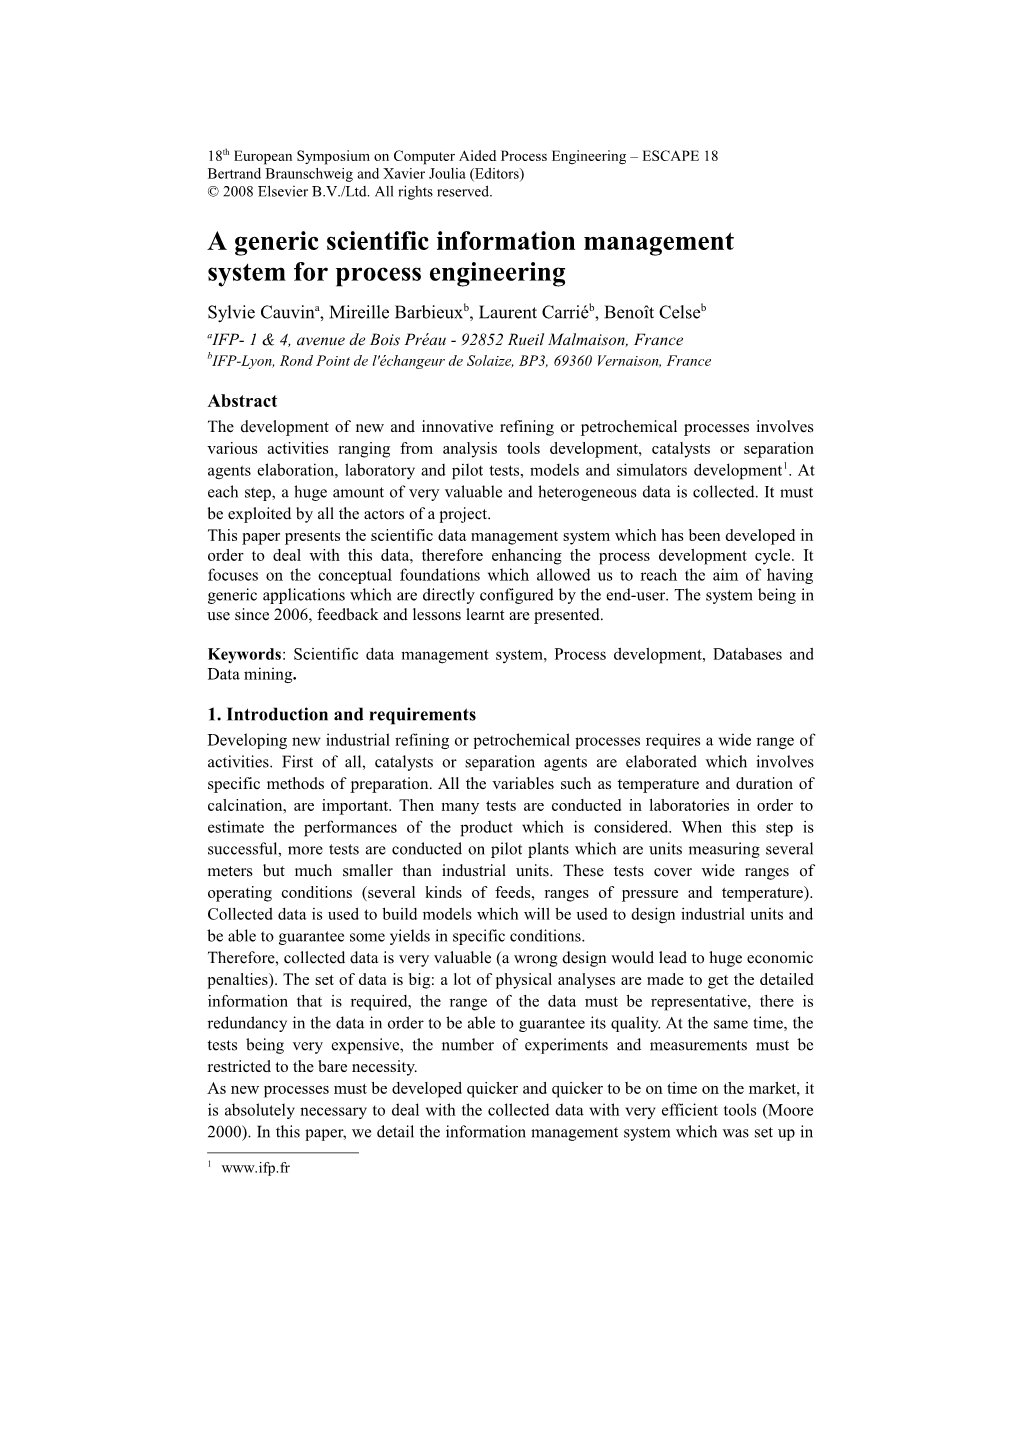 A Generic Scientific Information Management System for Process Engineering